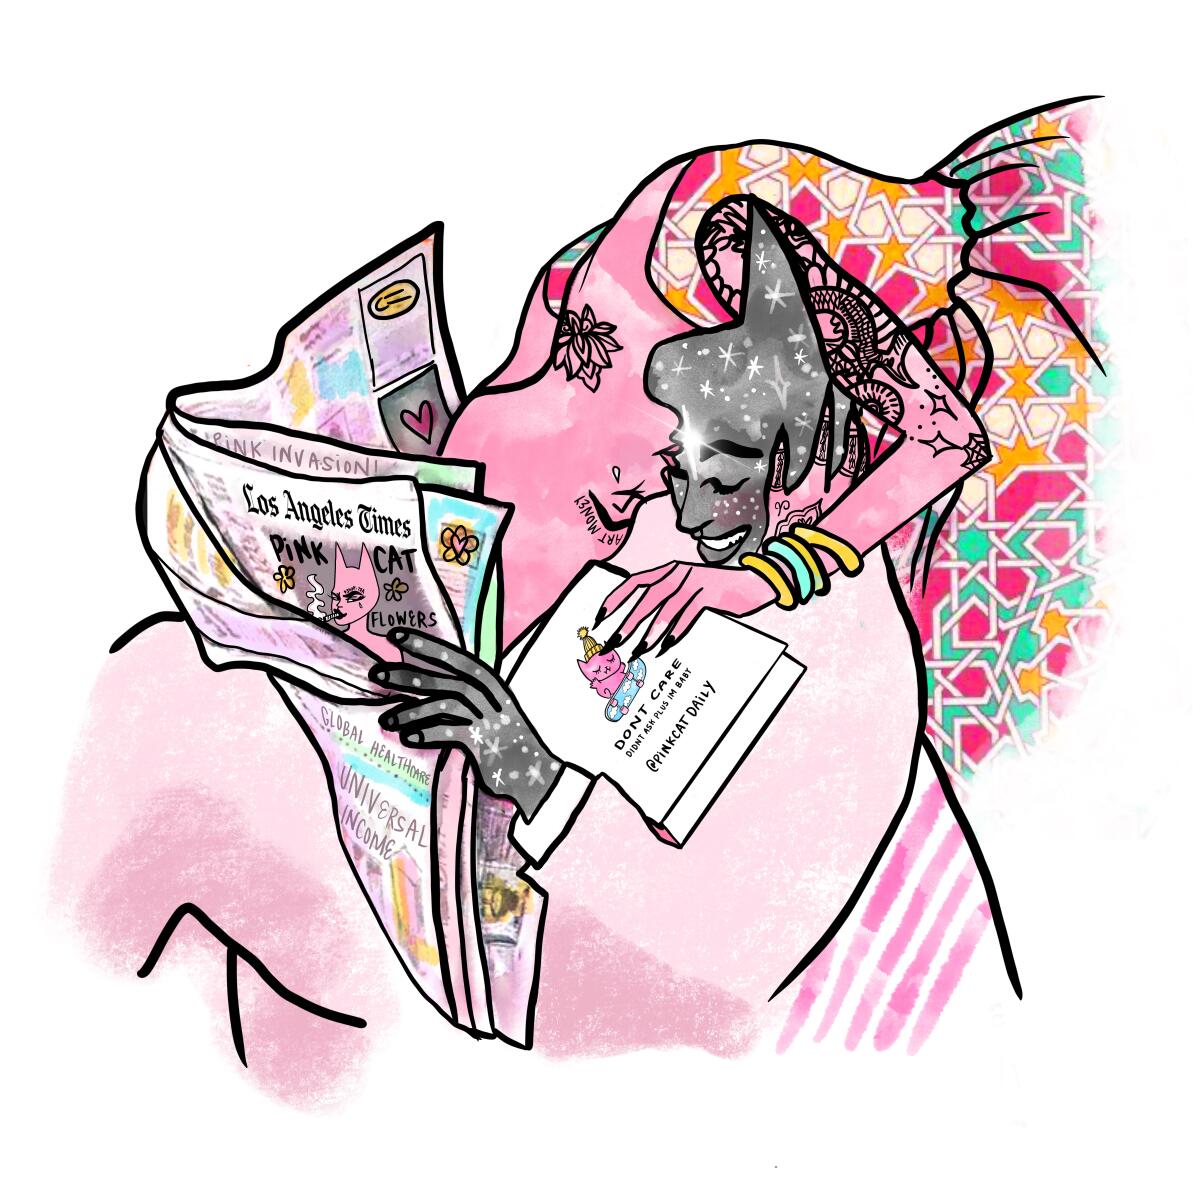 A cartoon character reads the Los Angeles Times as Pink Cat embraces him while holding a book.